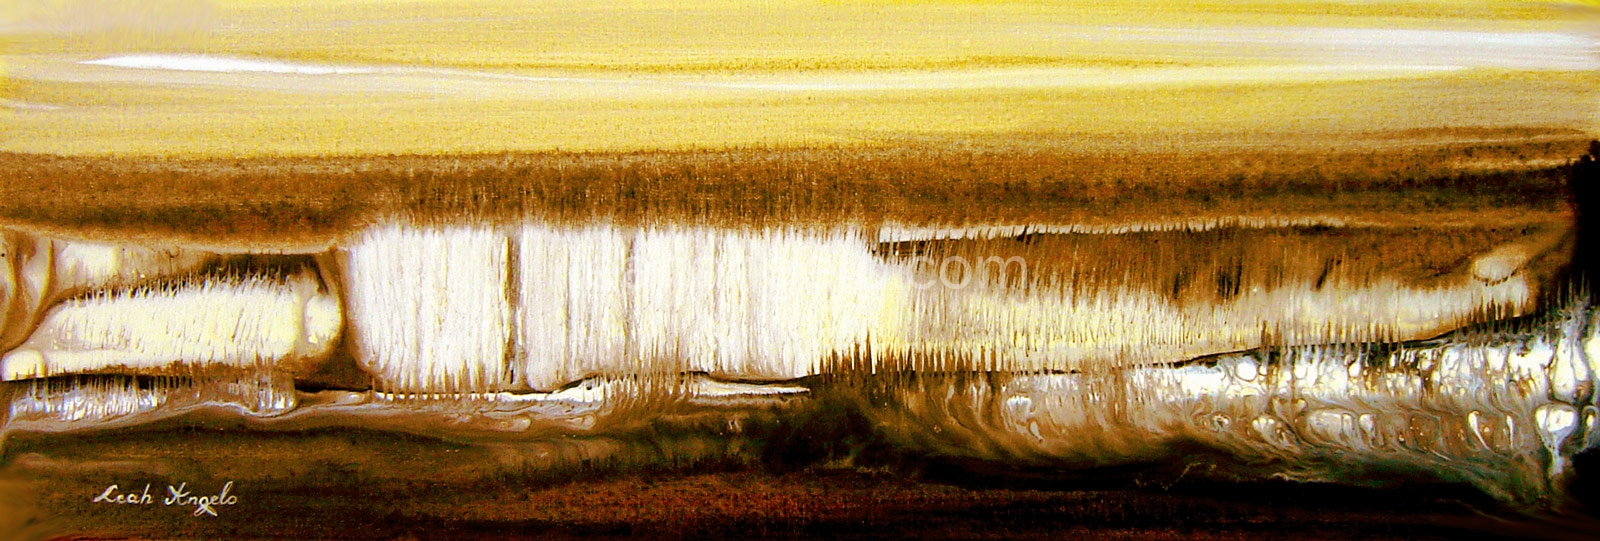 SHIMMERING WETLANDS - acrylic on canvas (91x30 cm) - Leah Angelo